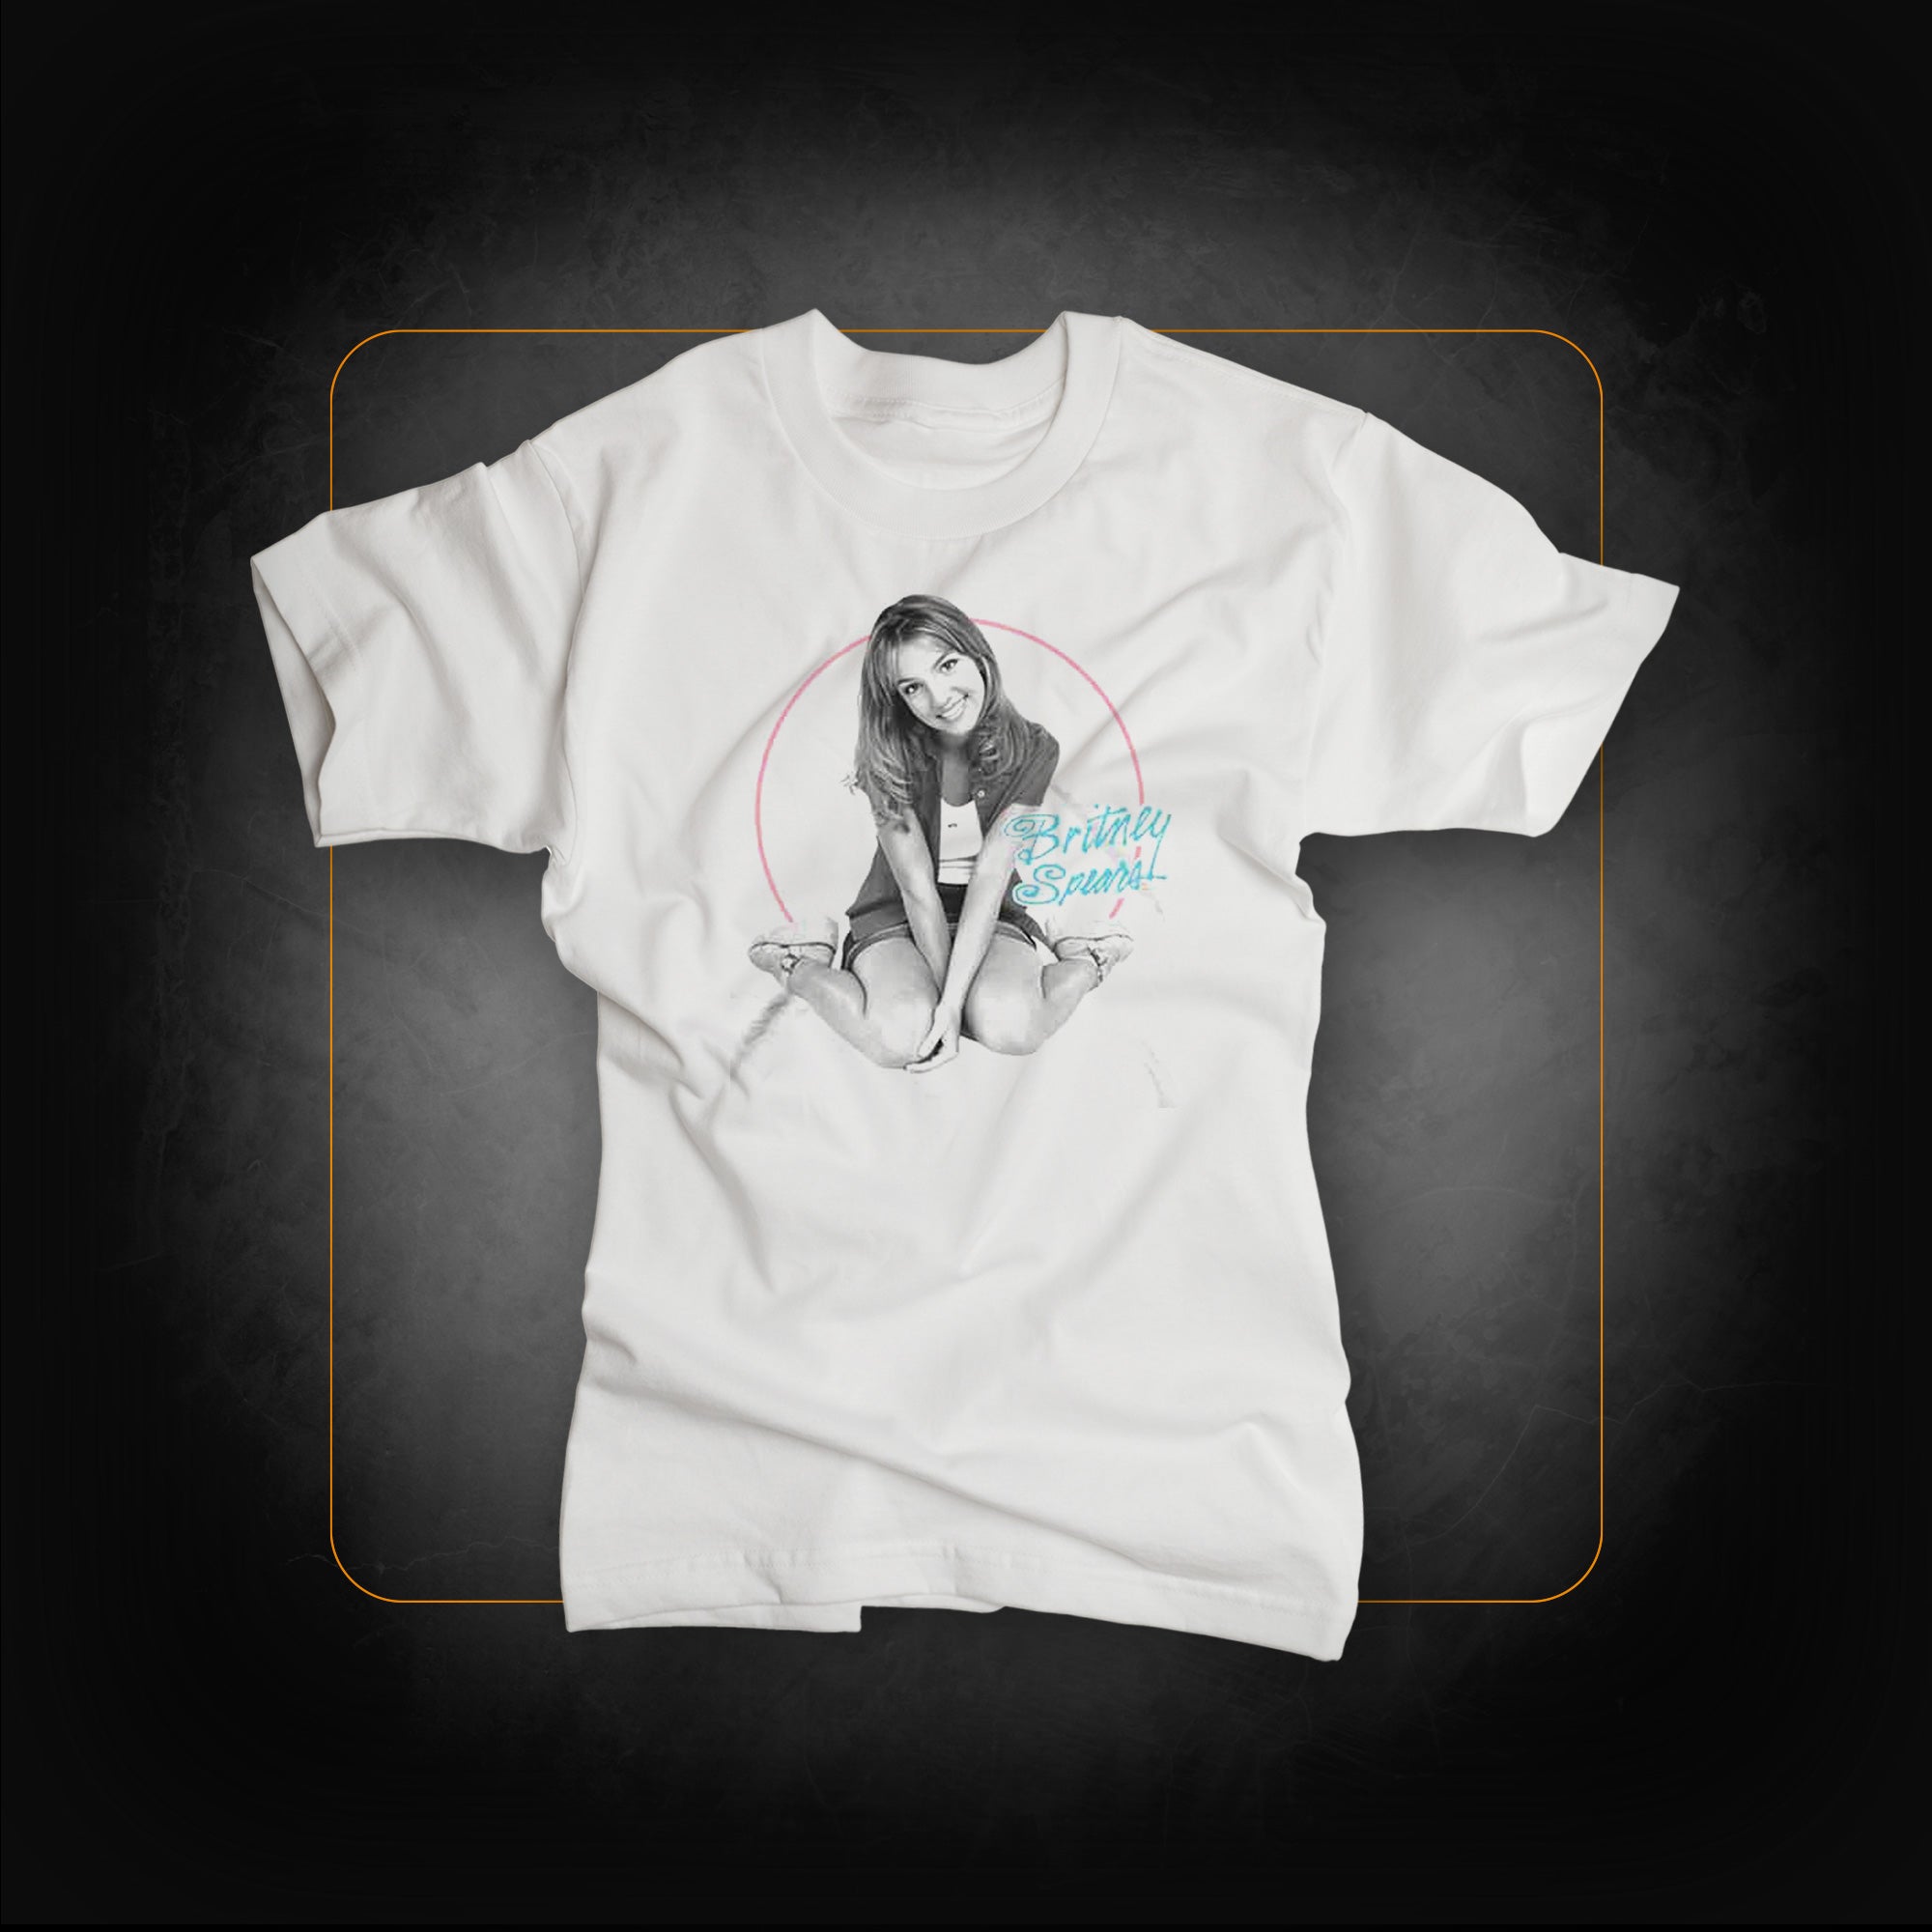 T-Shirt: Classic Circle - Britney Spears